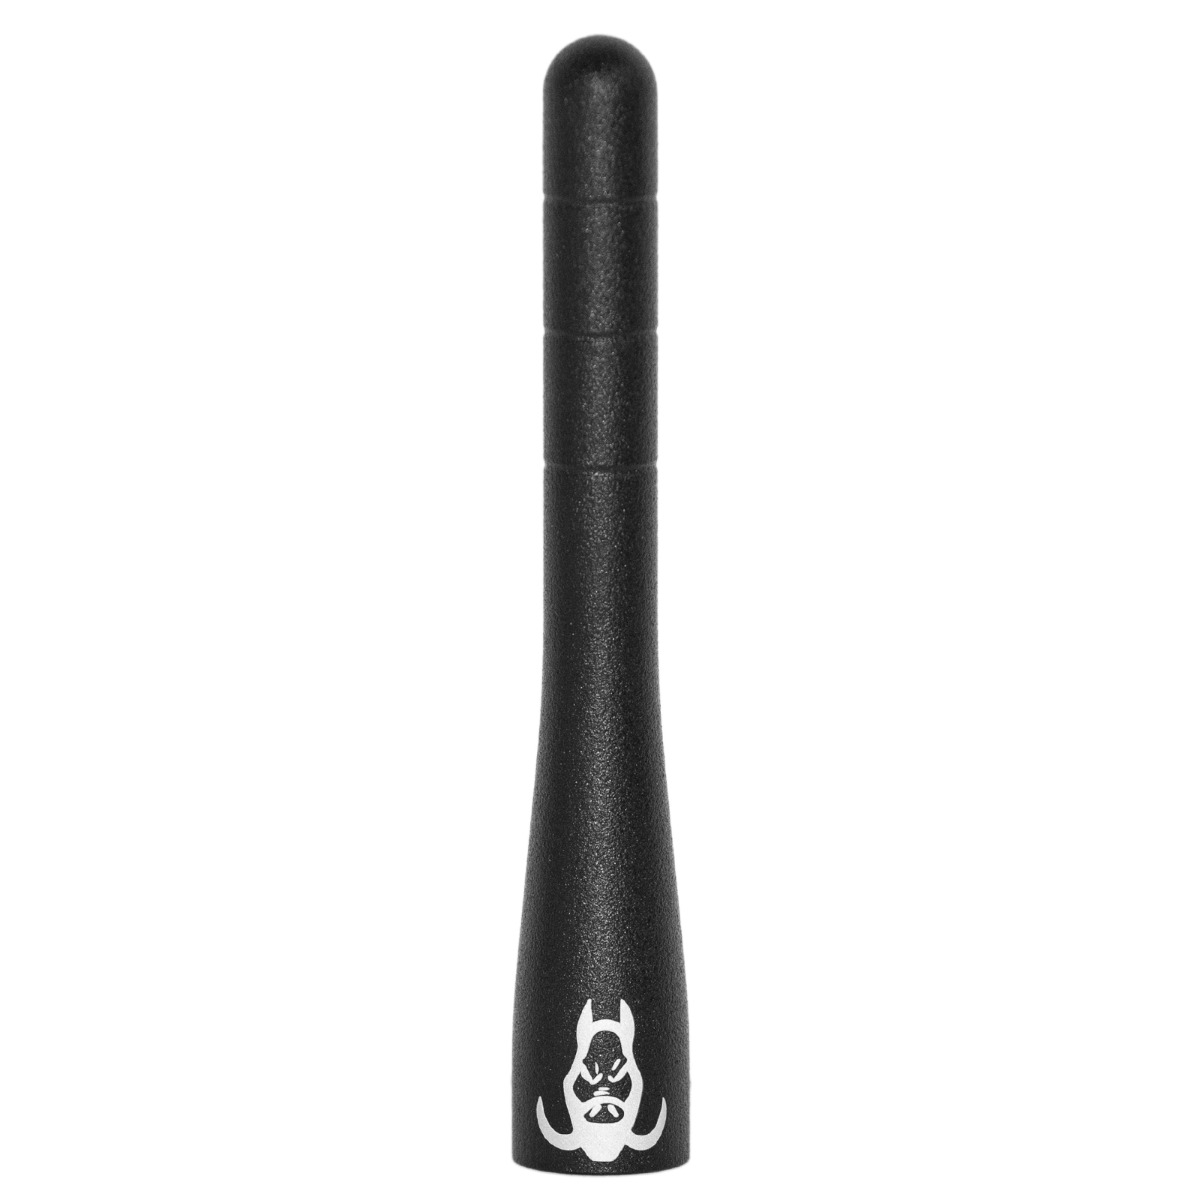 KSaAuto 4.5 Stubby Rocket Antenna Replacement for Harley Davidson 1998-2020 Black 